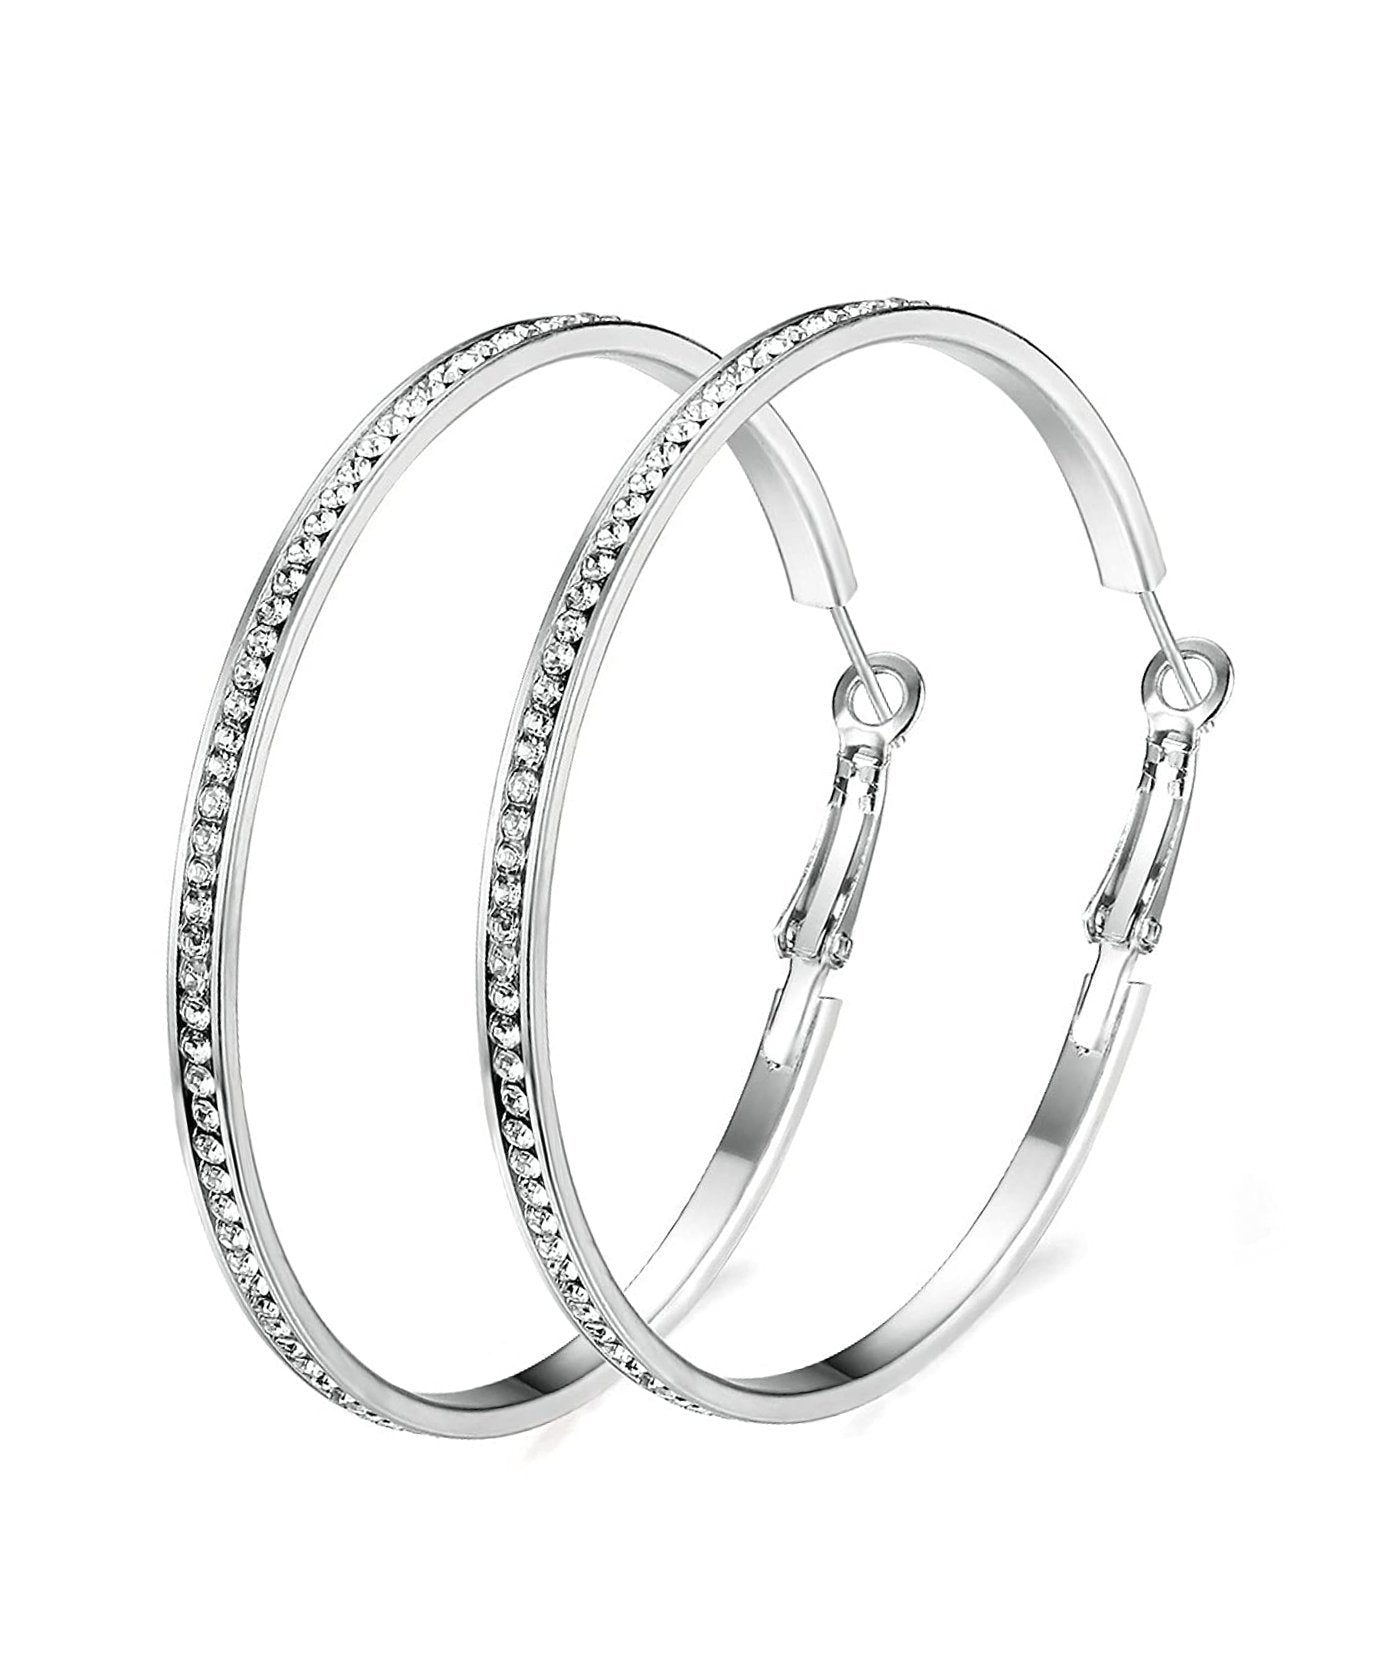 18K White Gold Plated Pave Hoop Earrings with Crystals - Hypoallergenic and Made in Italy Bijou Her